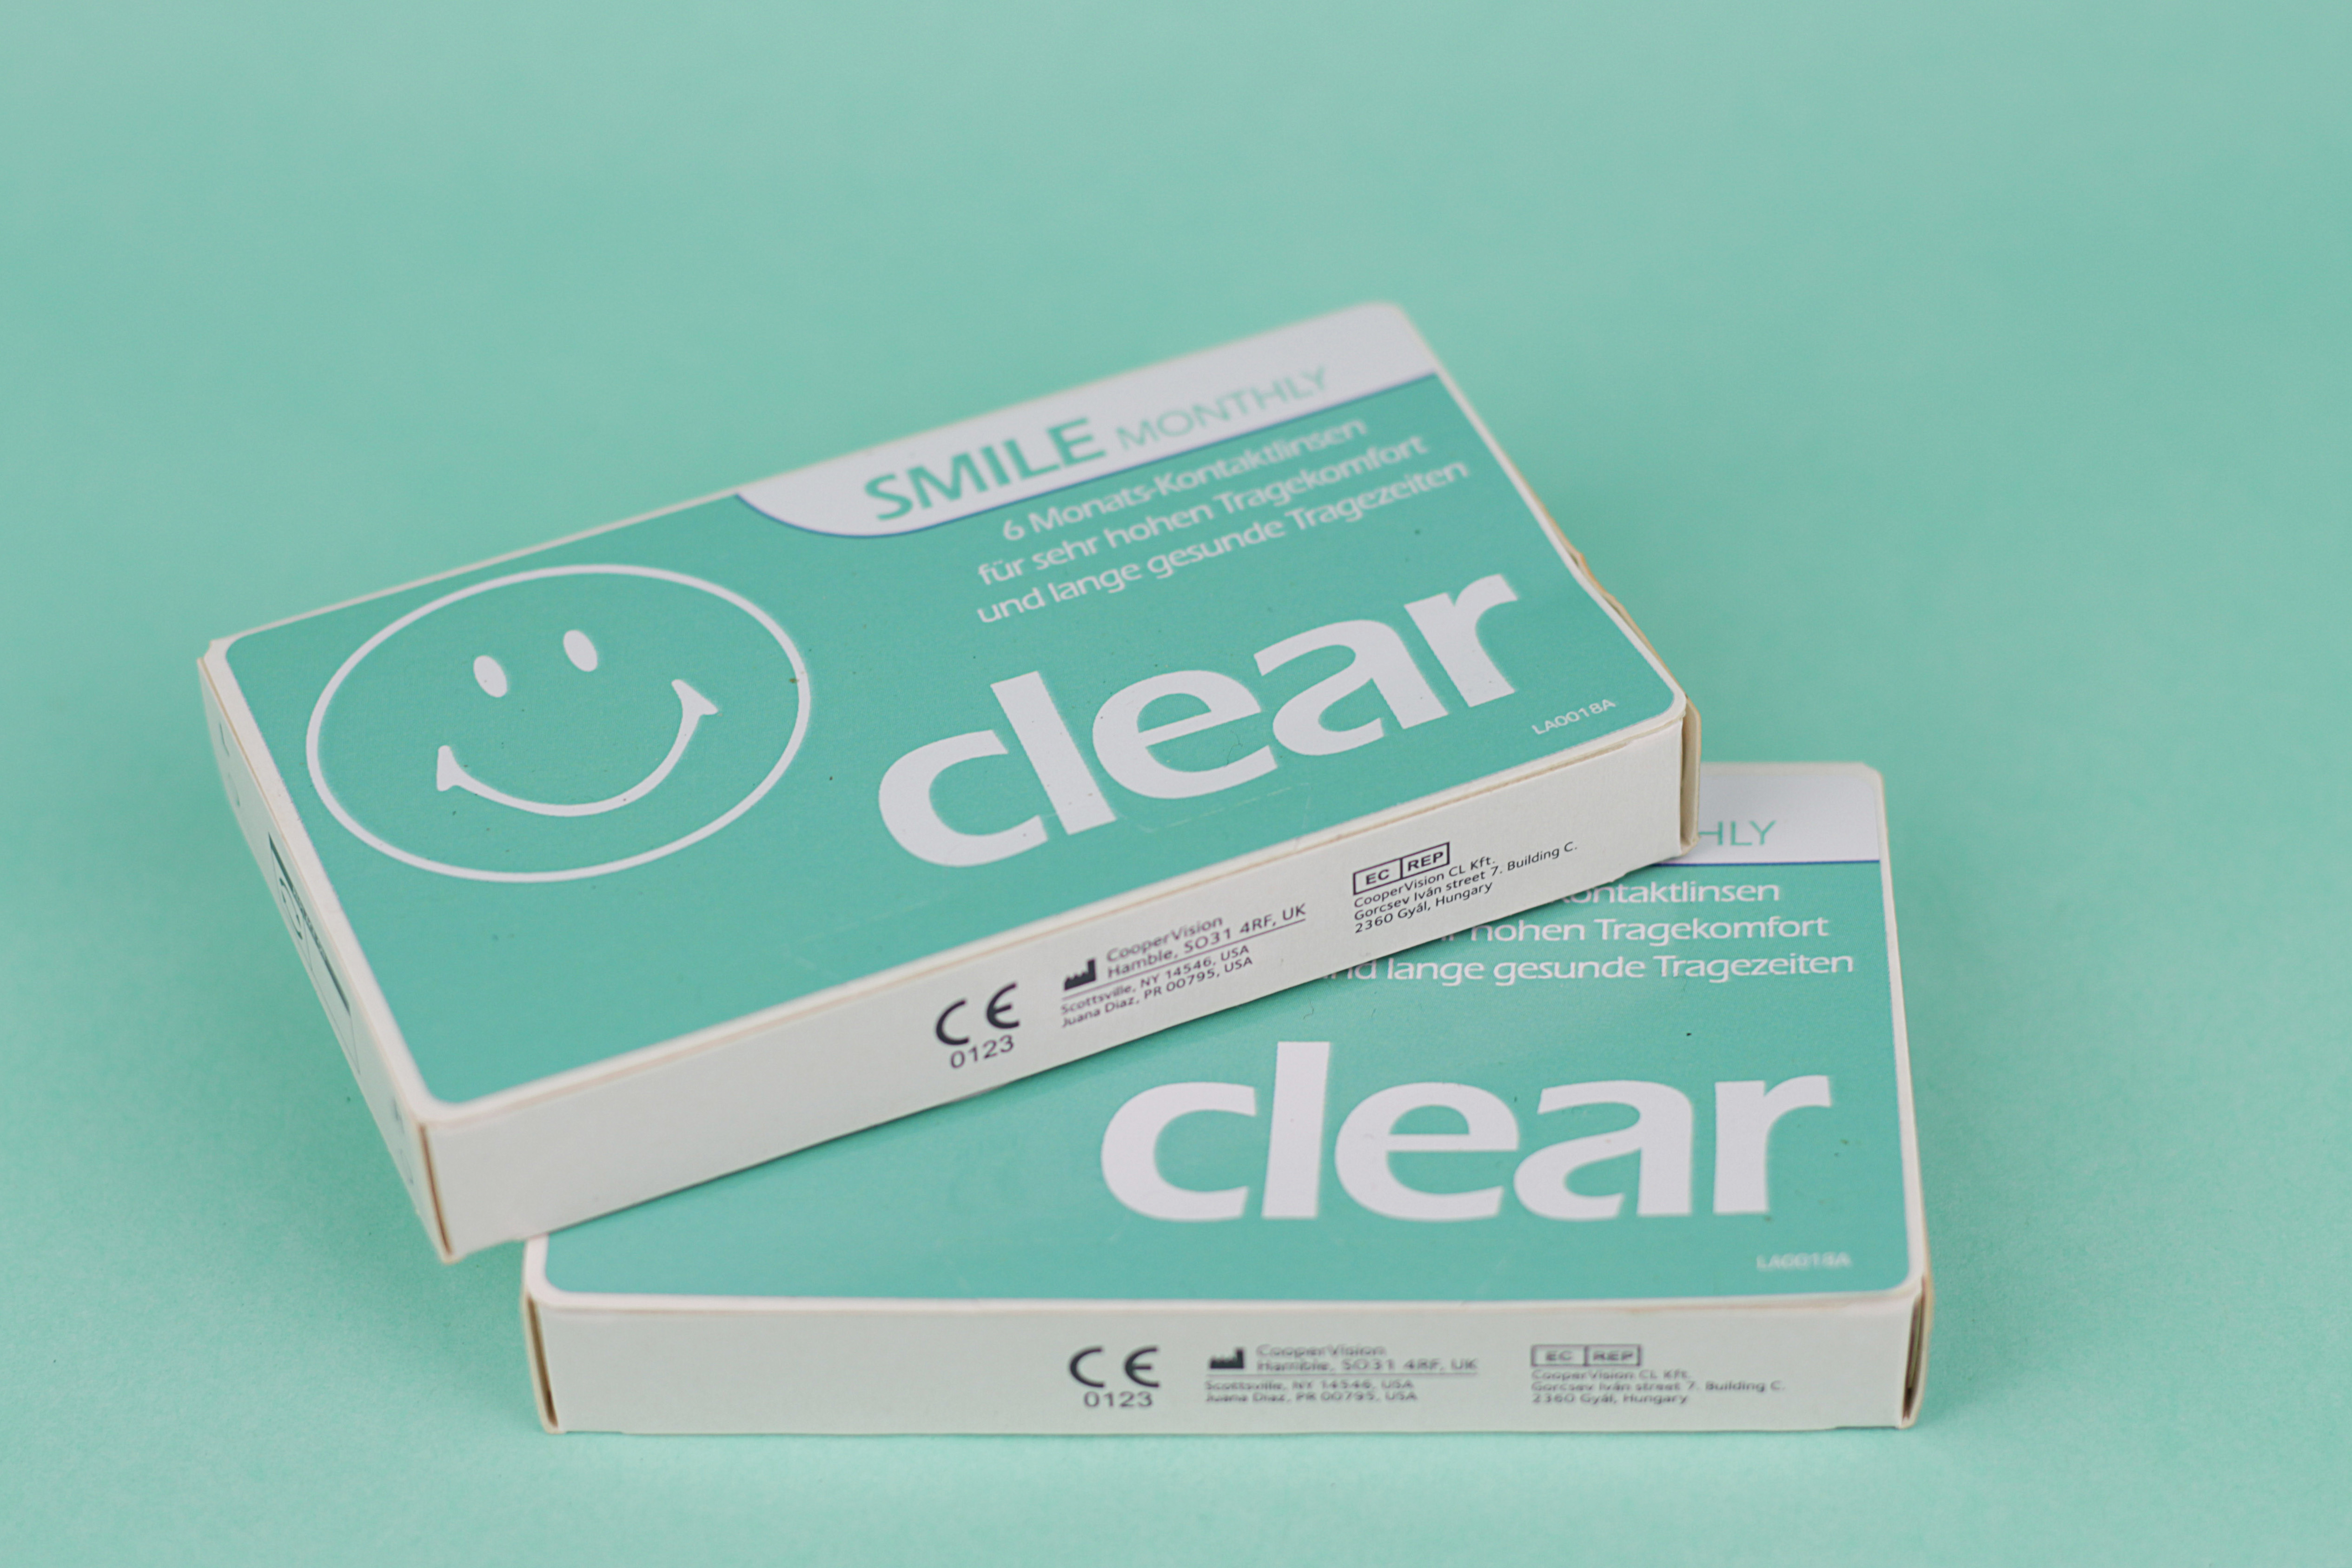 Smile Clear